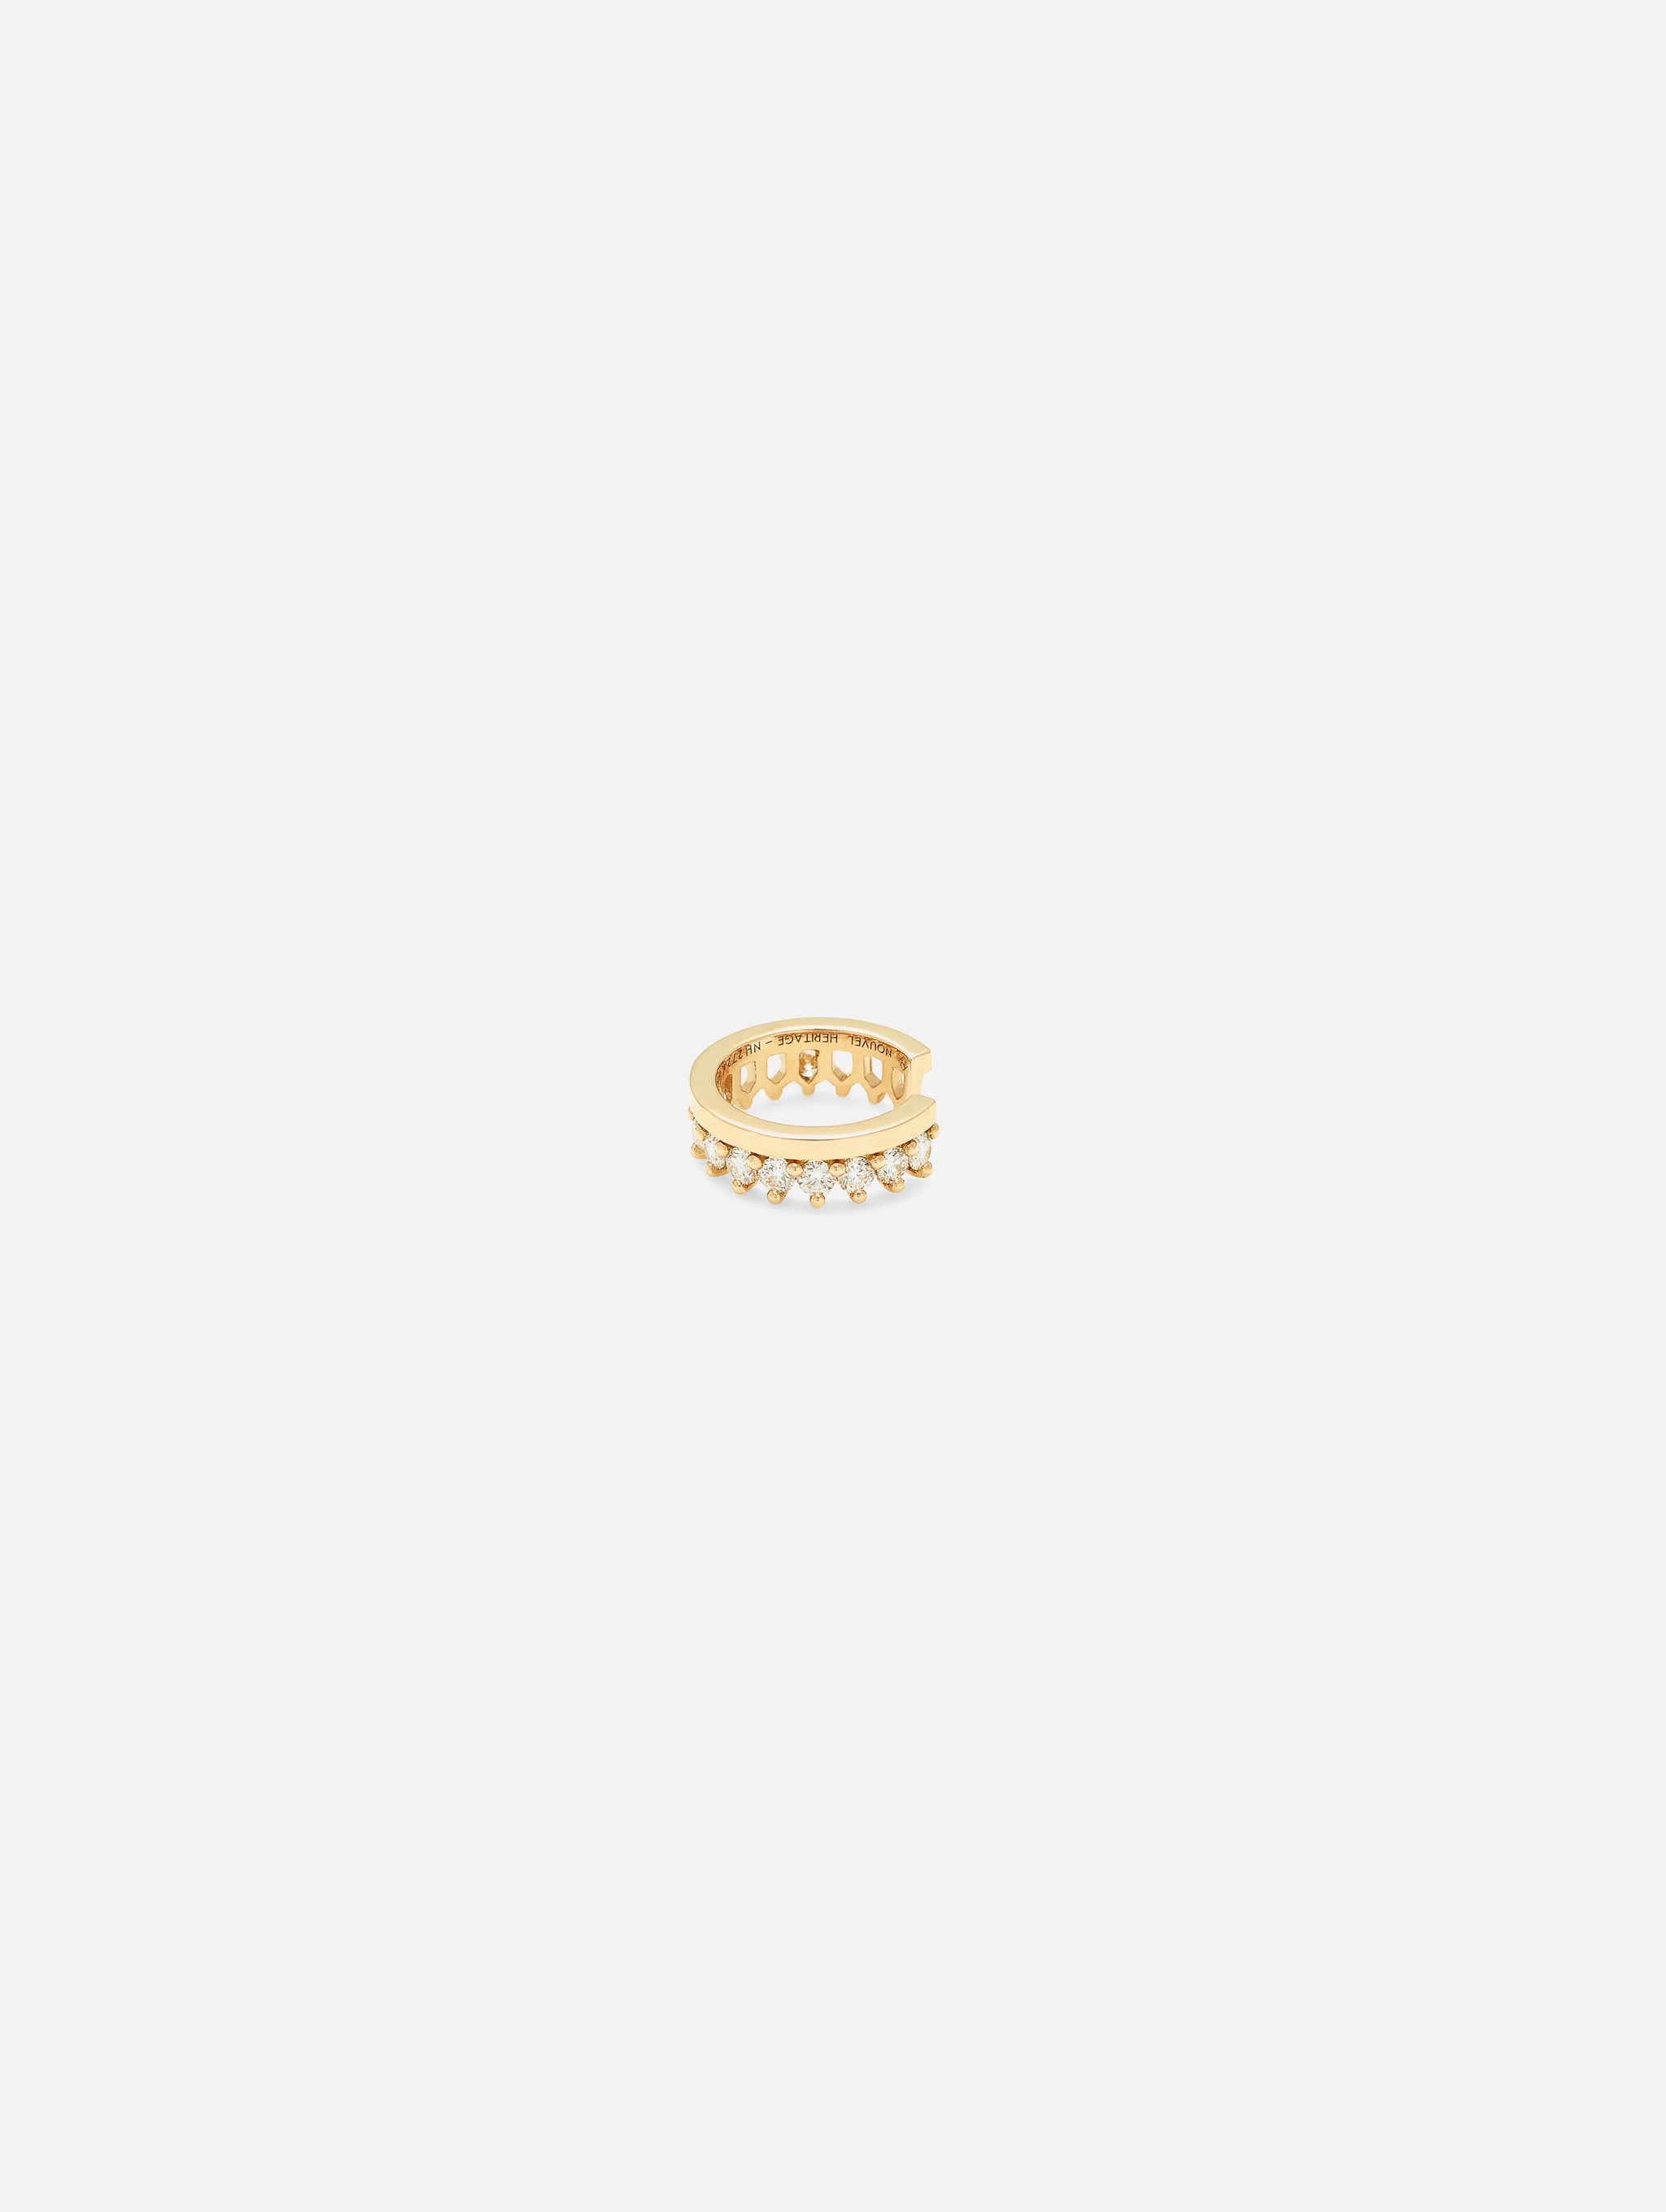 Simple Full Diamond Ear Cuff in Yellow Gold - 1 - Nouvel Heritage